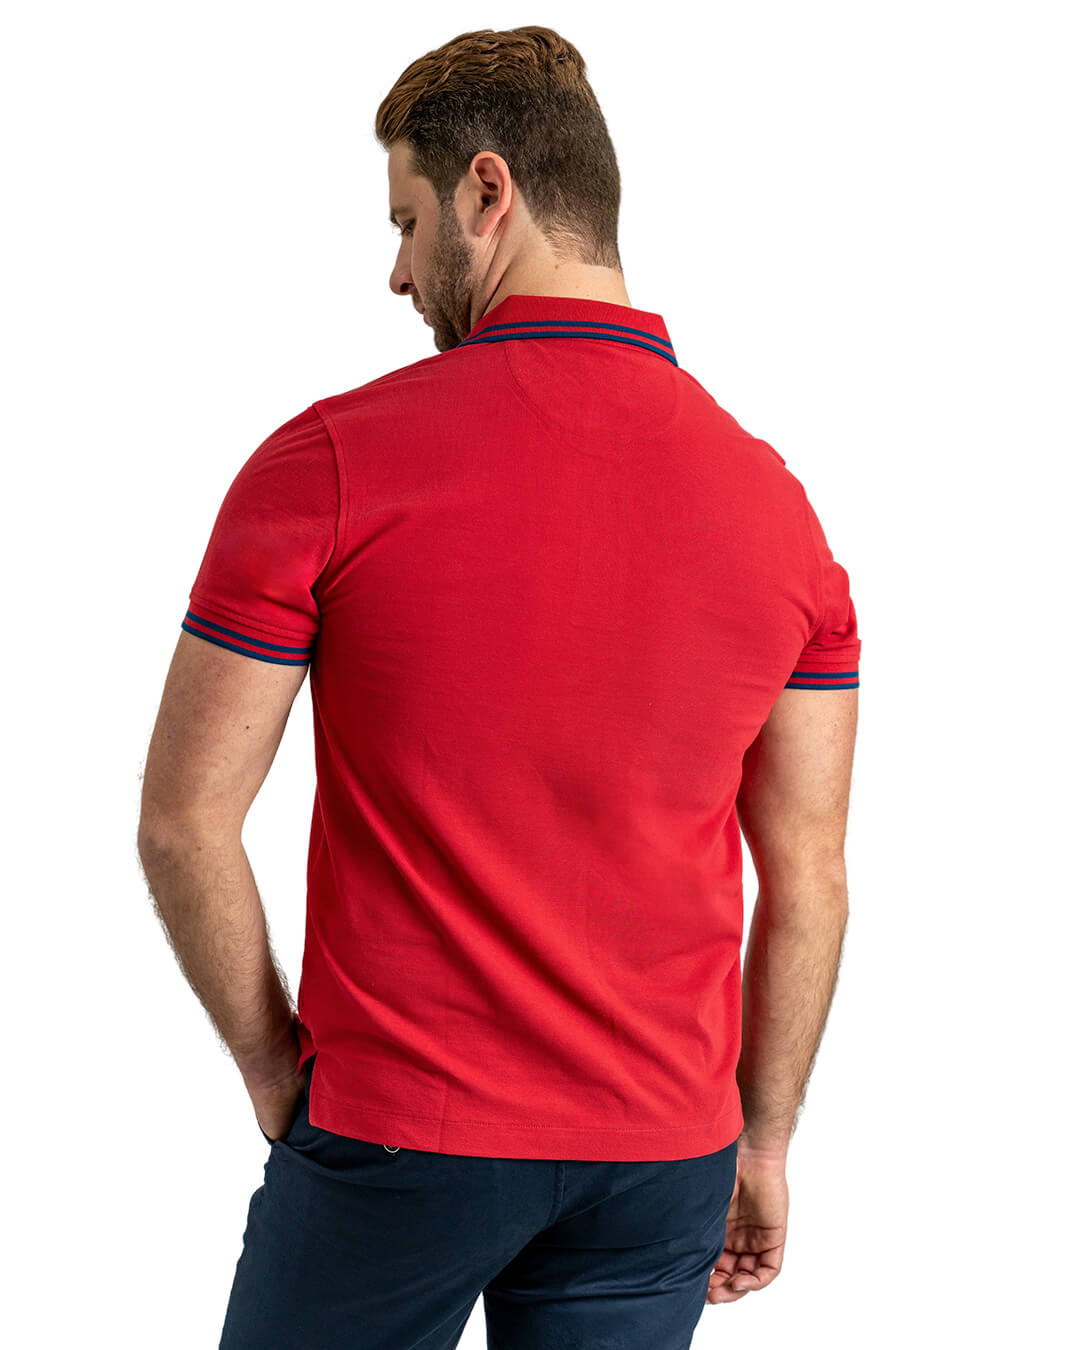 Red Pique Polo Shirt With Double Tipped Collar & Cuff